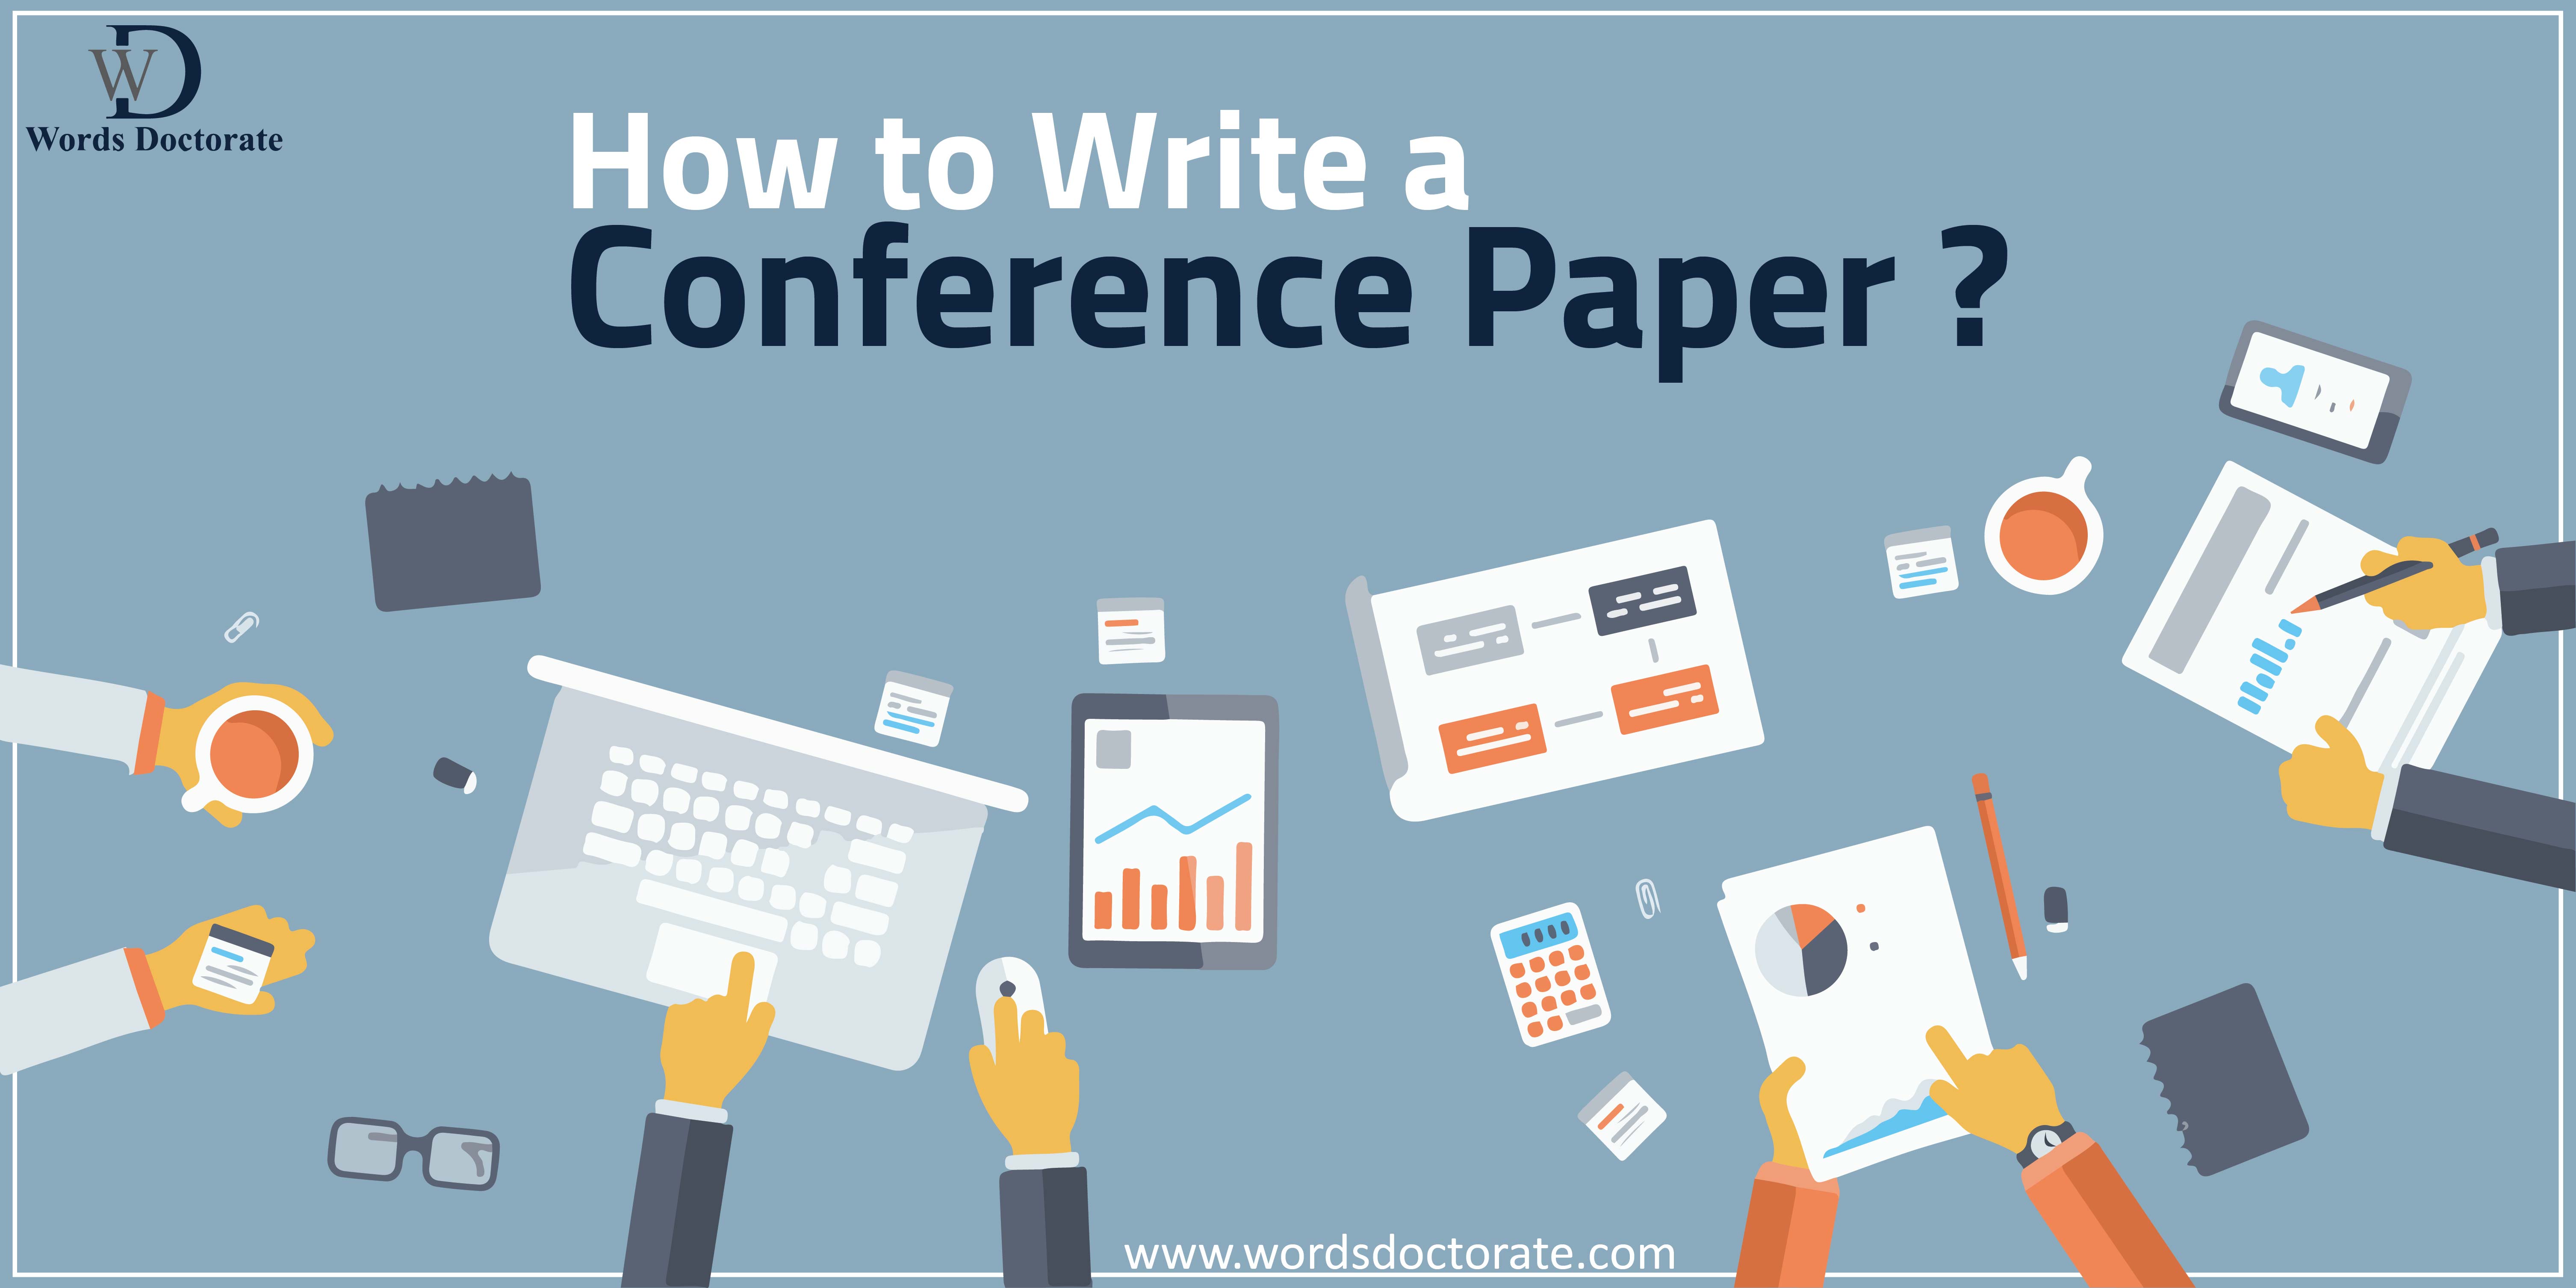 How to Write a Conference Paper - Step by Step Guidance